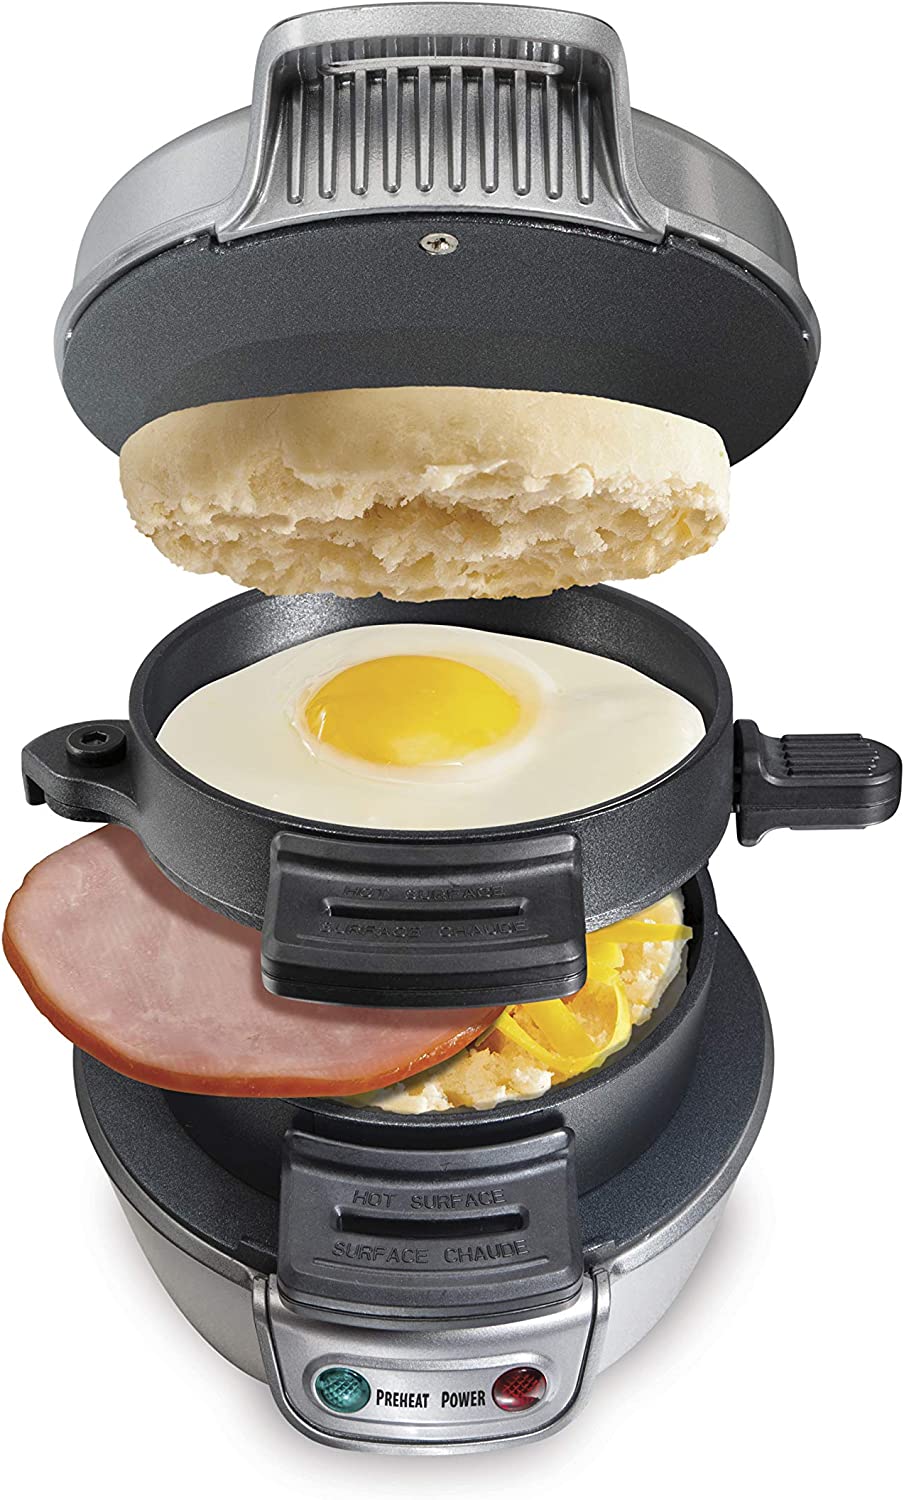 Hamilton Beach Breakfast Sandwich Maker with Egg Cooker Ring, Customize Ingredients, Perfect for English Muffins, Croissants, Mini Waffles, Single, Silver (25475A) Discontinued - havana shop